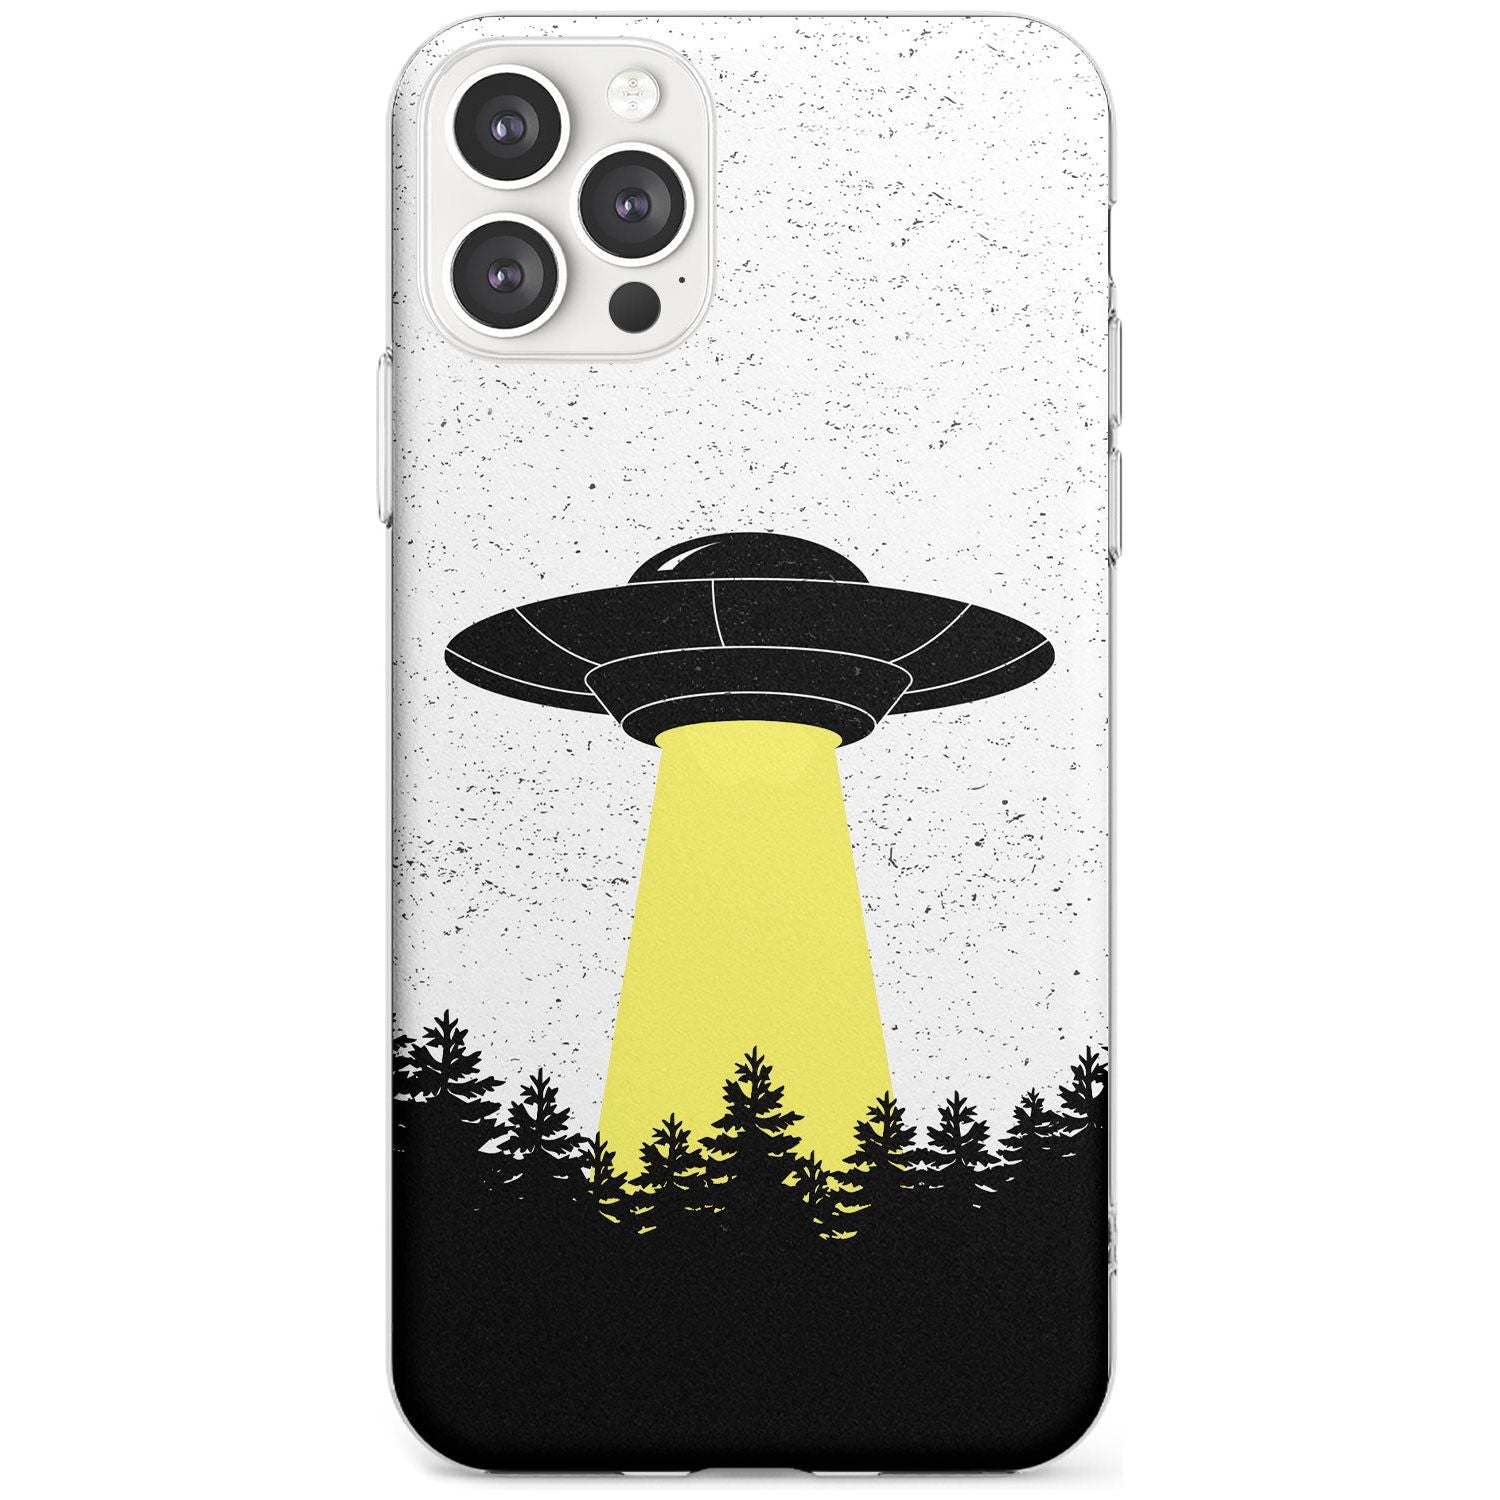 Forest Abduction Slim TPU Phone Case for iPhone 11 Pro Max